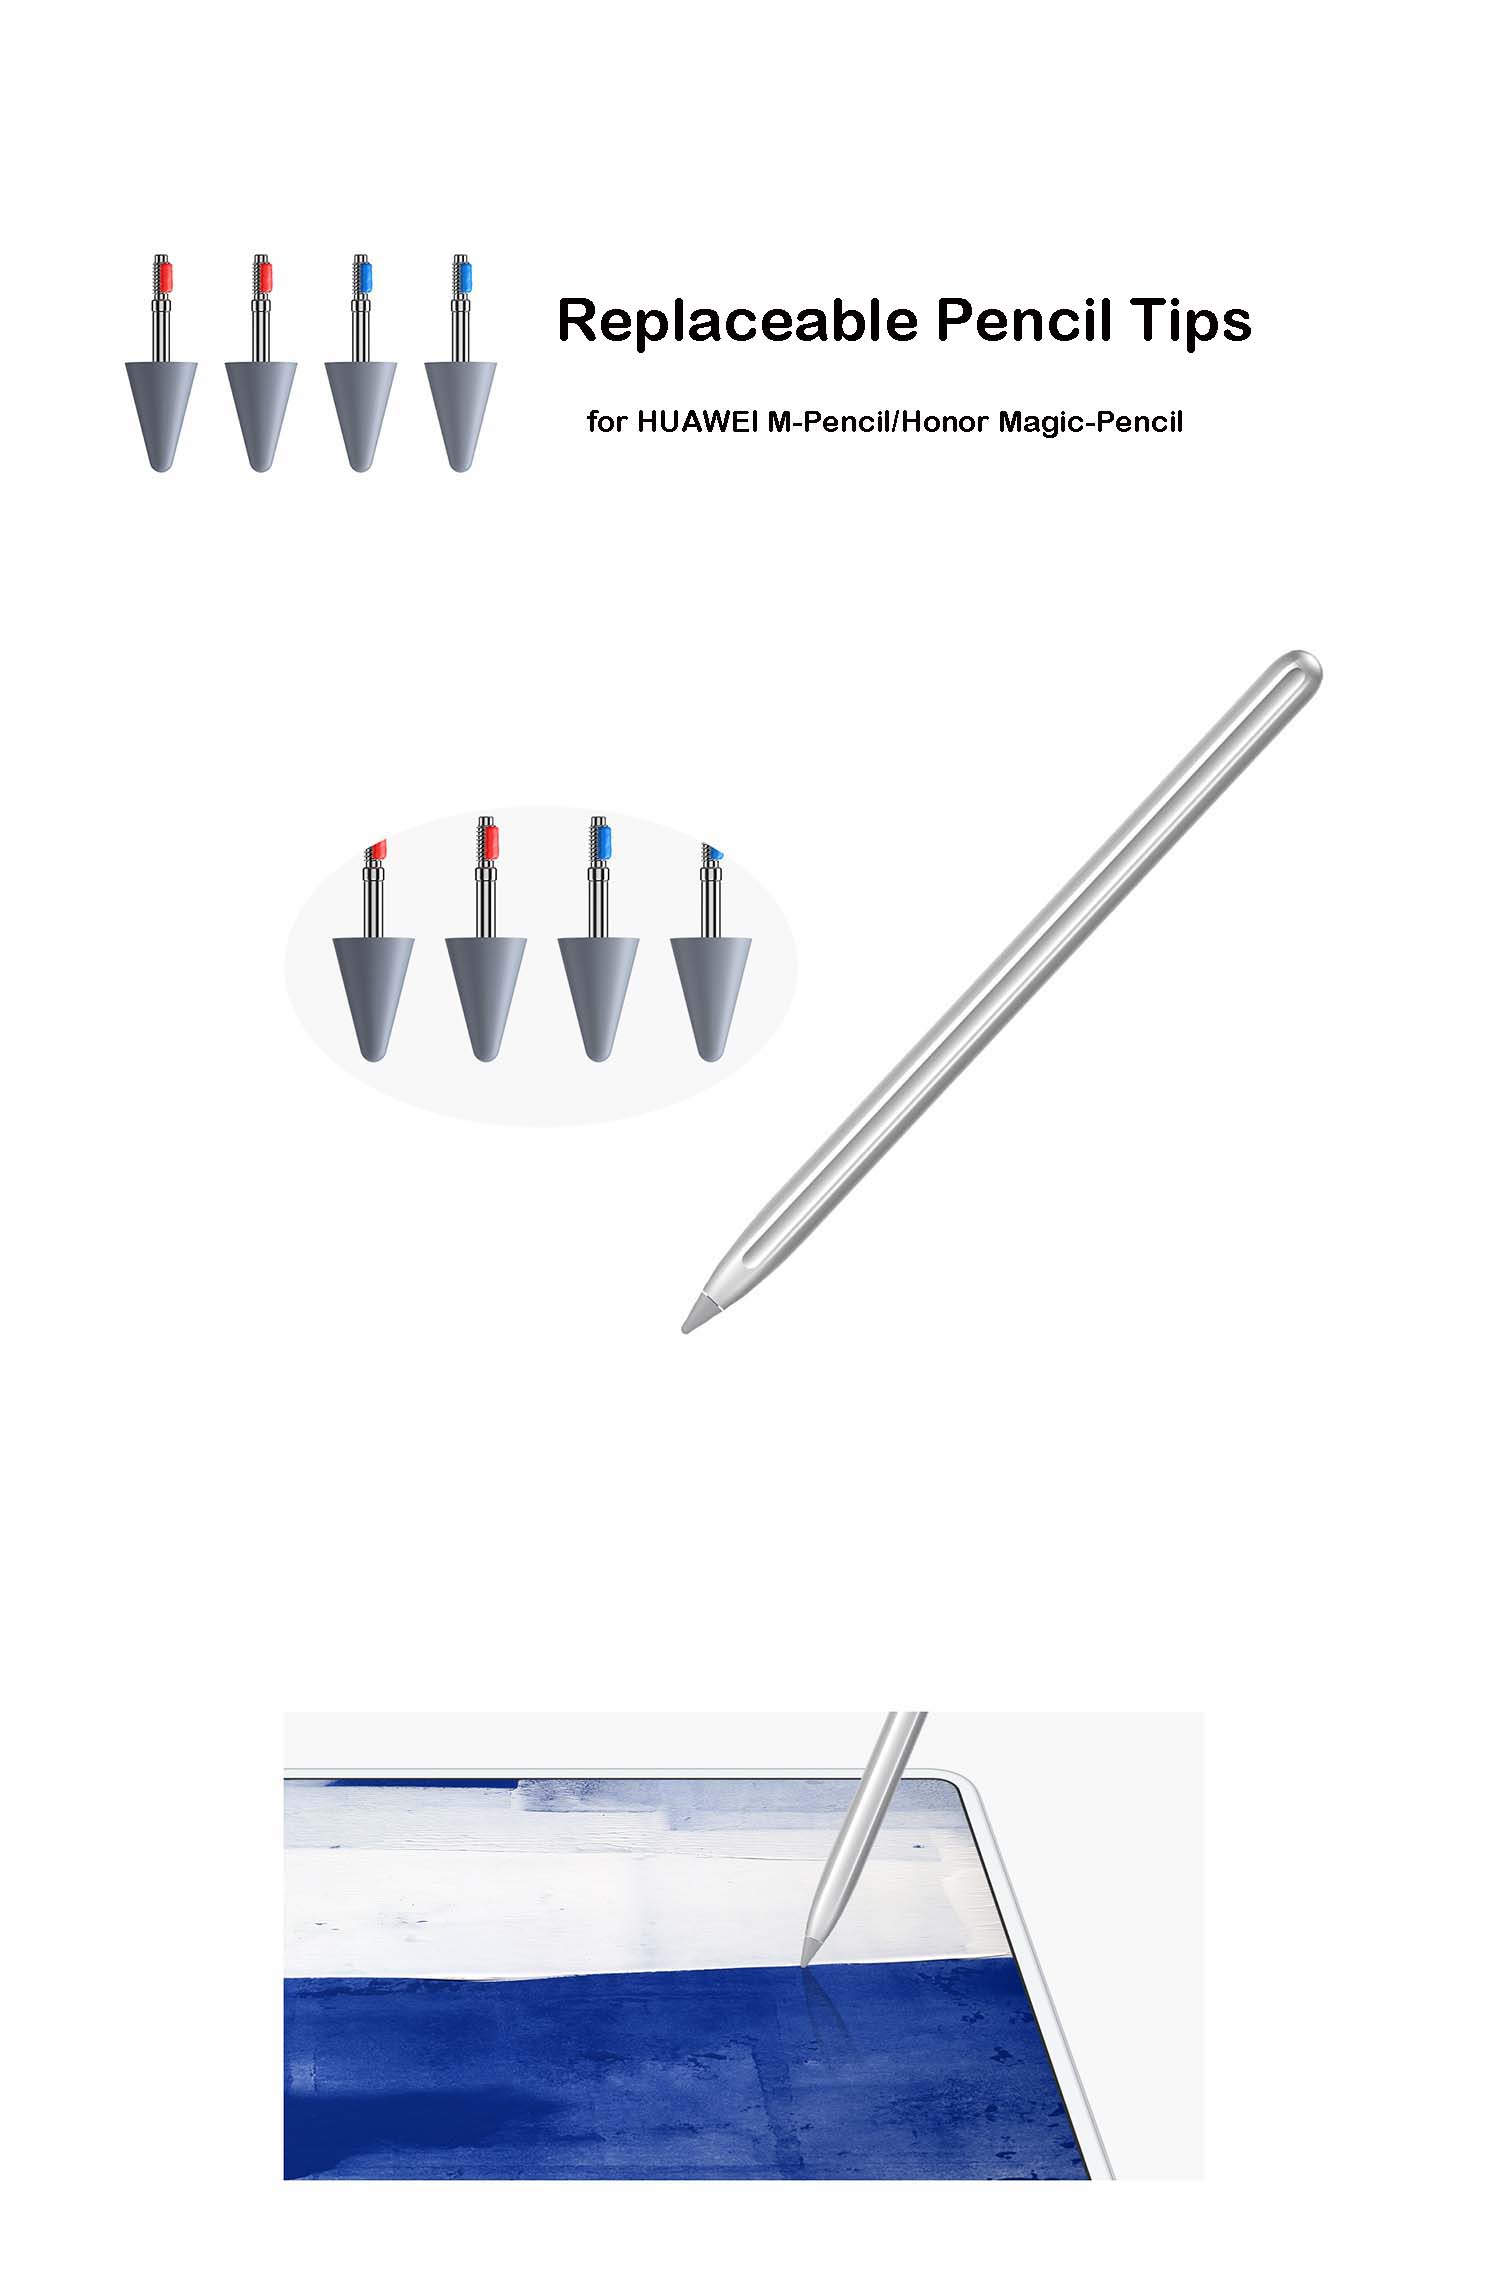 4 Replaceable Pencil Tips